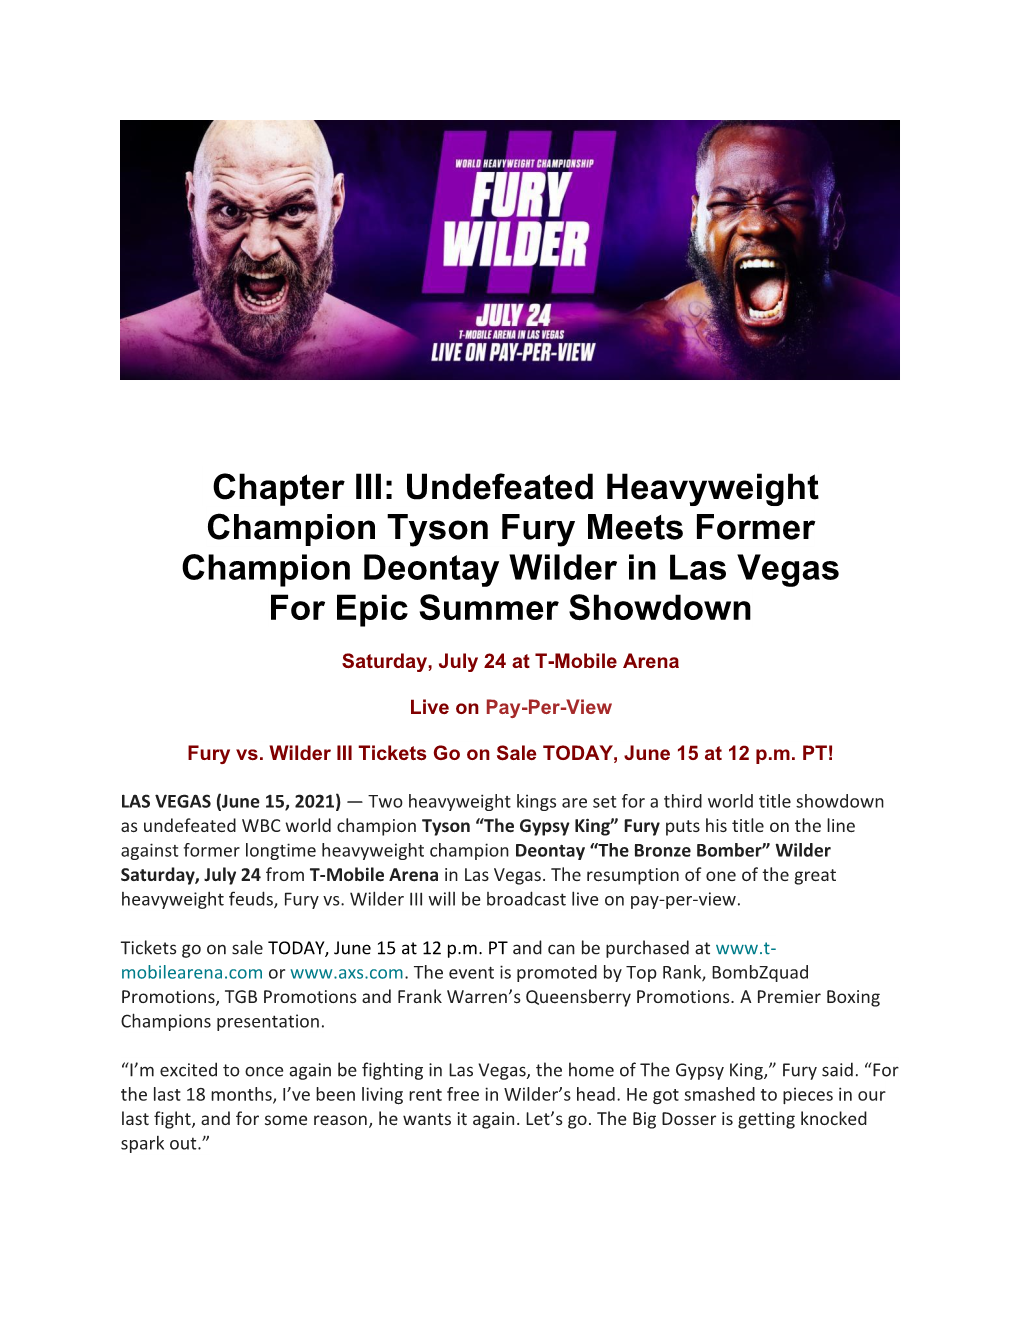 Chapter III: Undefeated Heavyweight Champion Tyson Fury Meets Former Champion Deontay Wilder in Las Vegas for Epic Summer Showdown